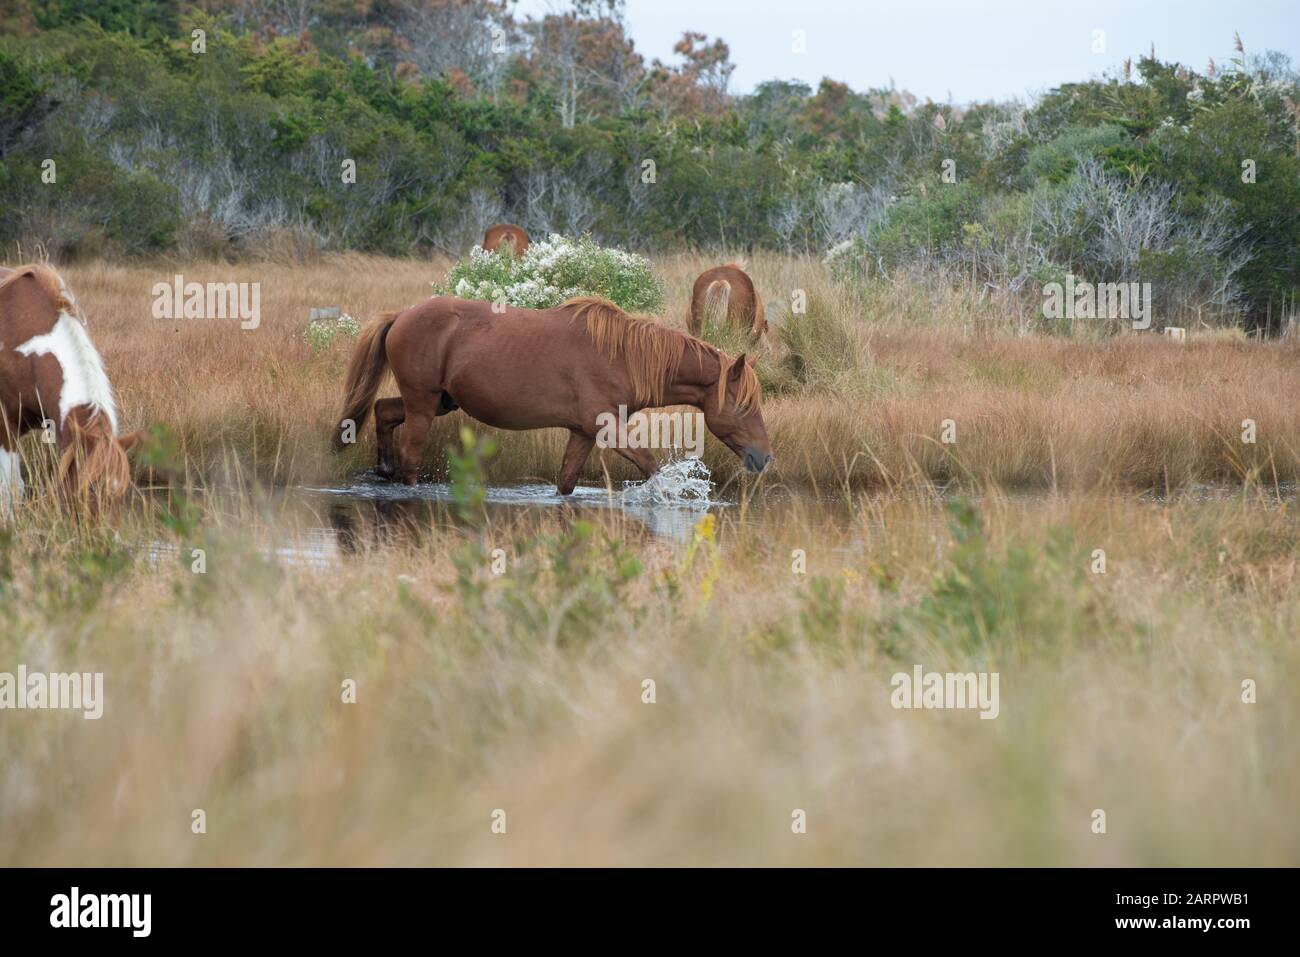 A band of wild horses gather around a fresh water pond at Assateague National Seashore, located on the eastern shore of Maryland, USA. Stock Photo